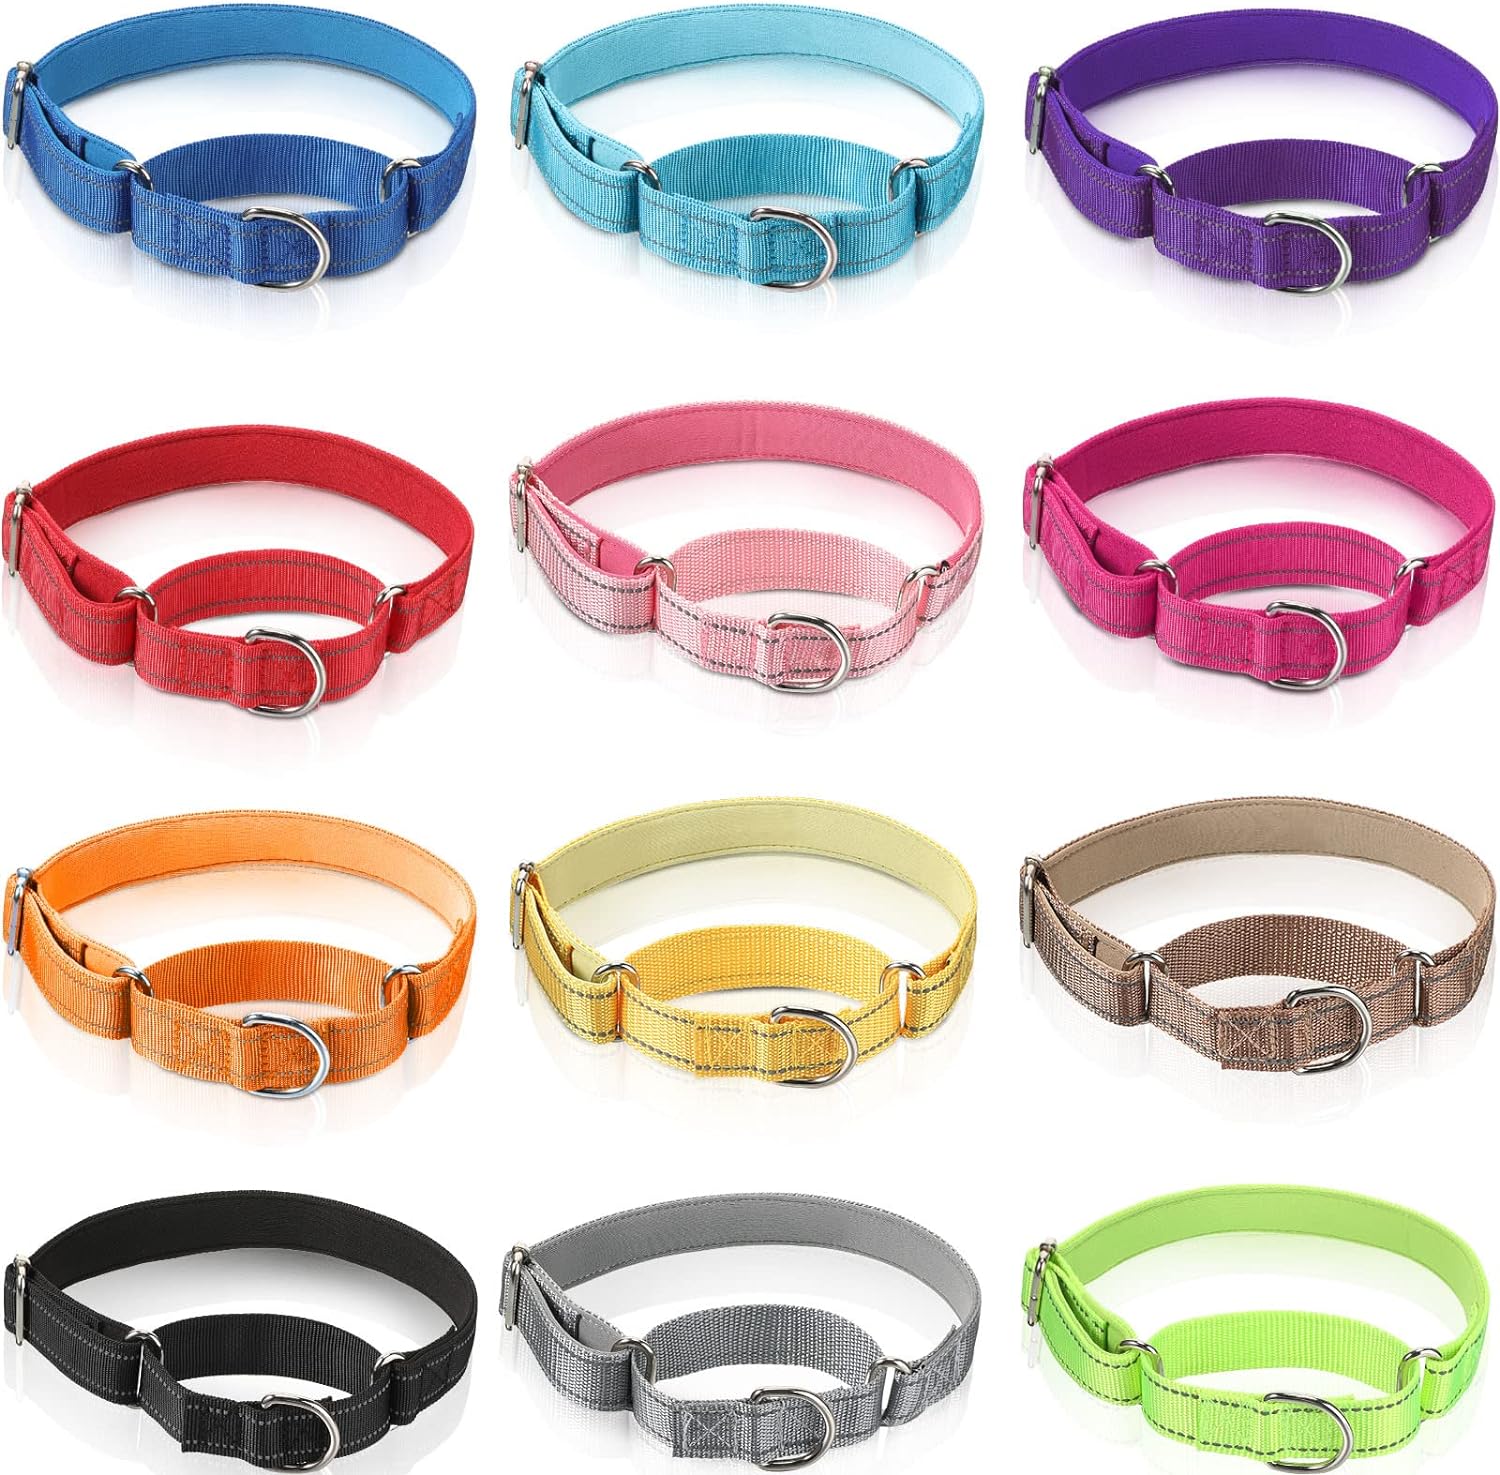 Cunno 12 Pcs Martingale Collar for Medium Dogs Reflective Dog Collar with Durable Metal Buckle Adjustable Nylon Pet Collar Prevent Slipping Out Puppy Collars for Dog, 12 Colors (Medium)